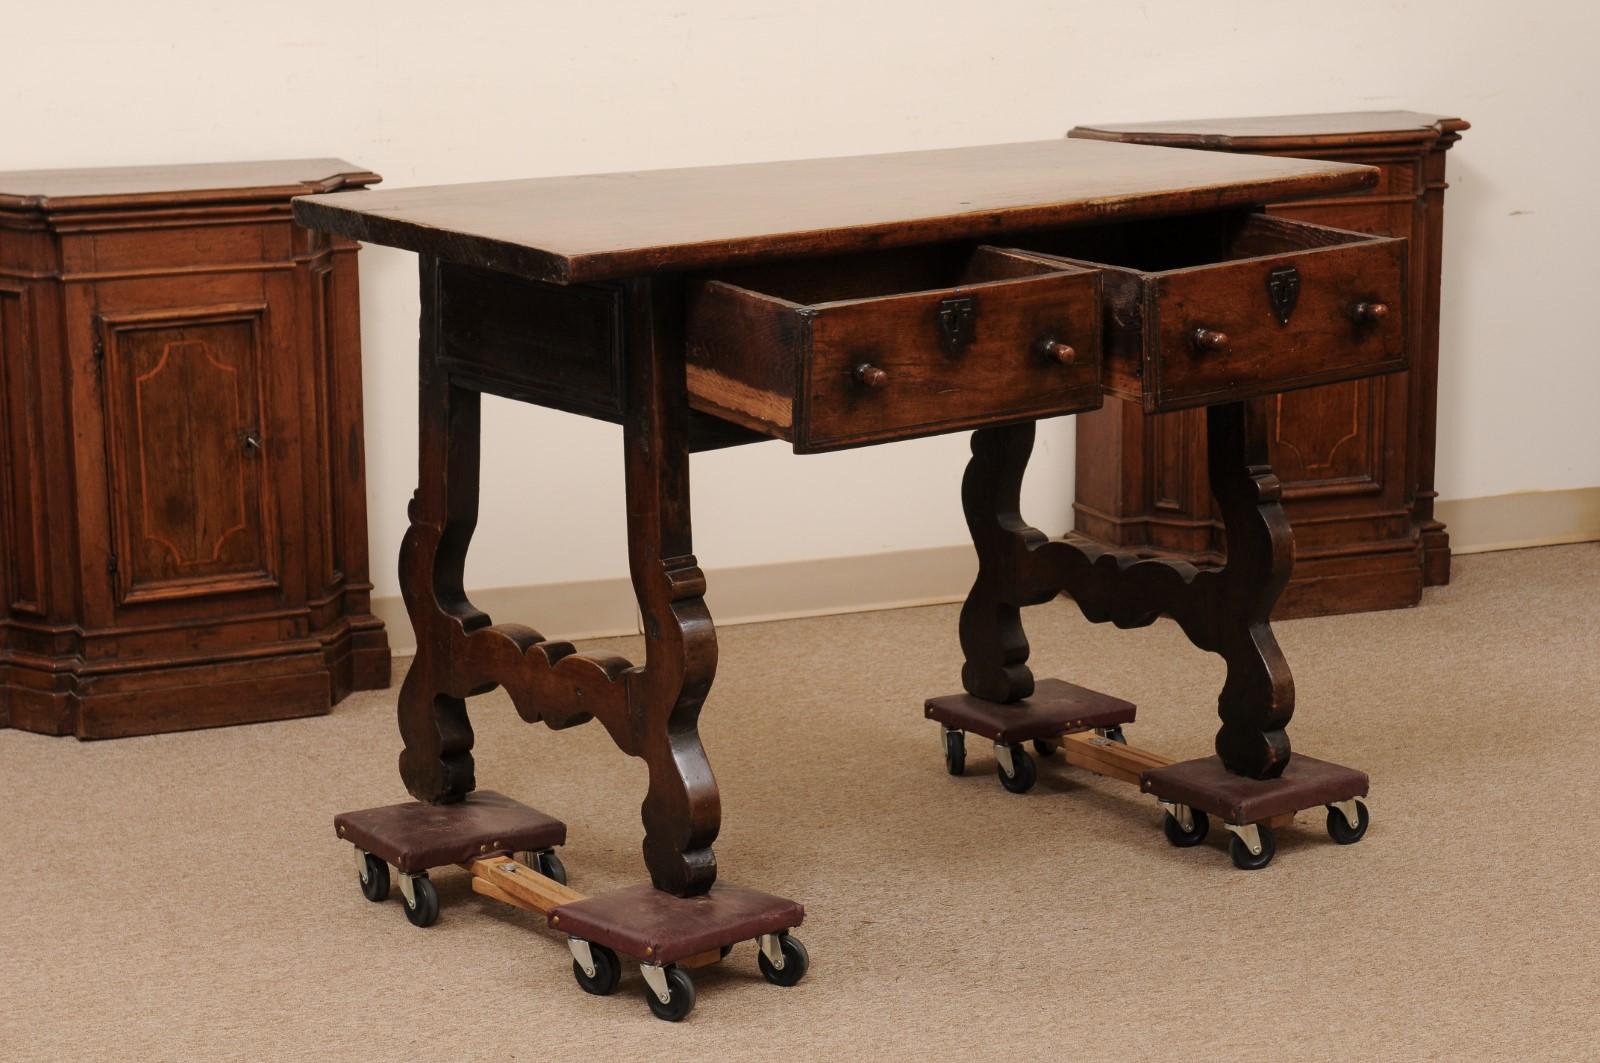 Spanish Walnut Console Table with 2 Drawers and Lyre Legs, Early 18th Century For Sale 2